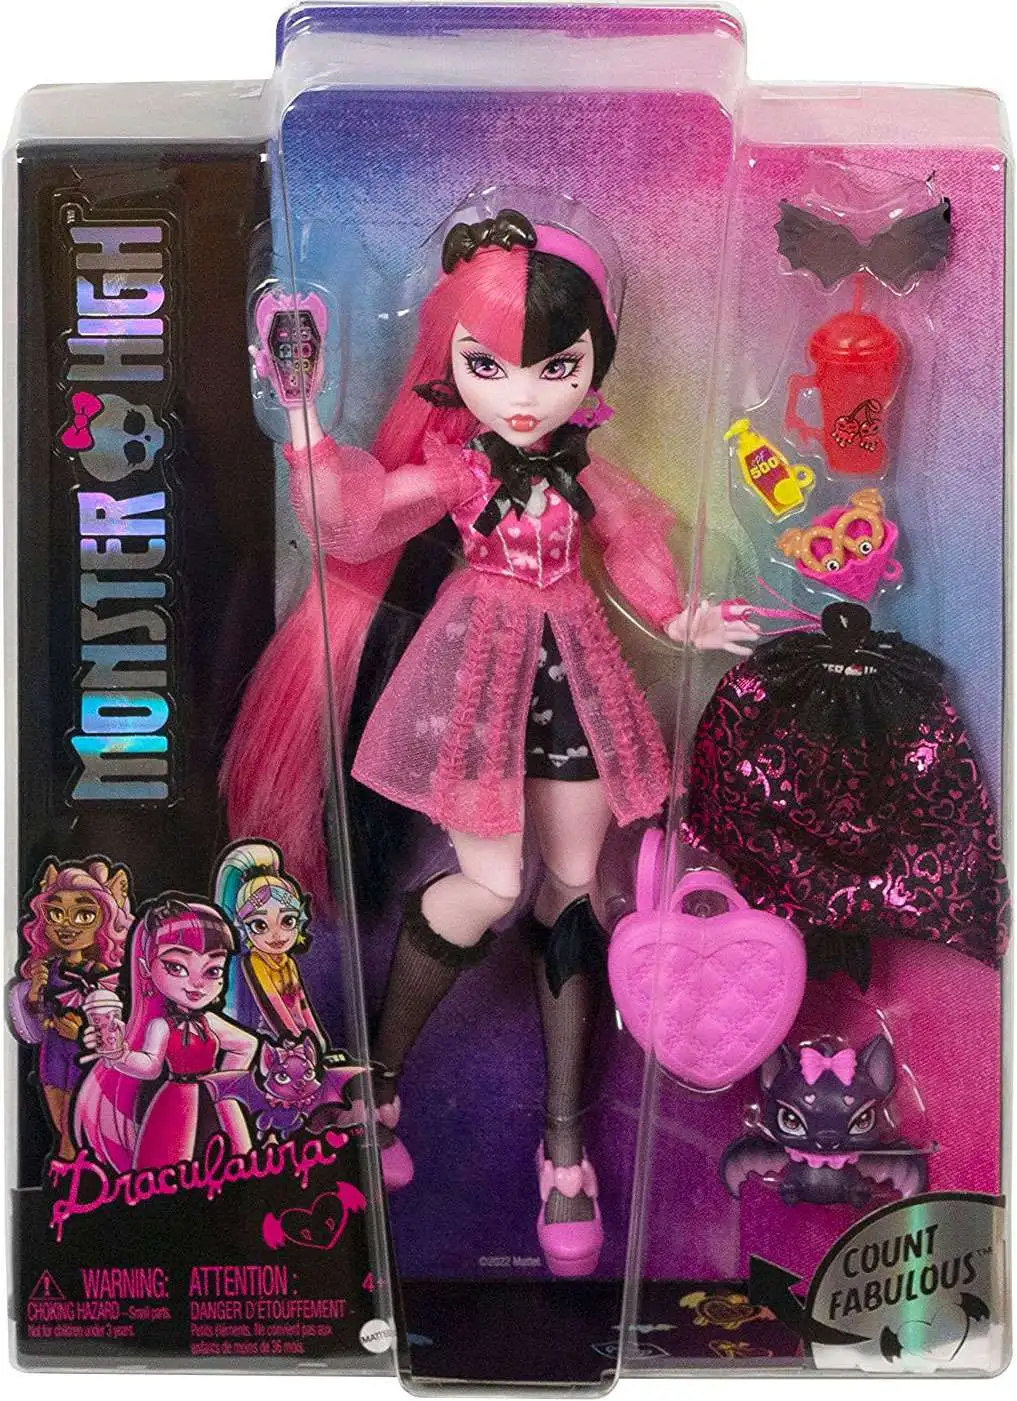 Monster High Draculaura Doll [with Count Fabulous